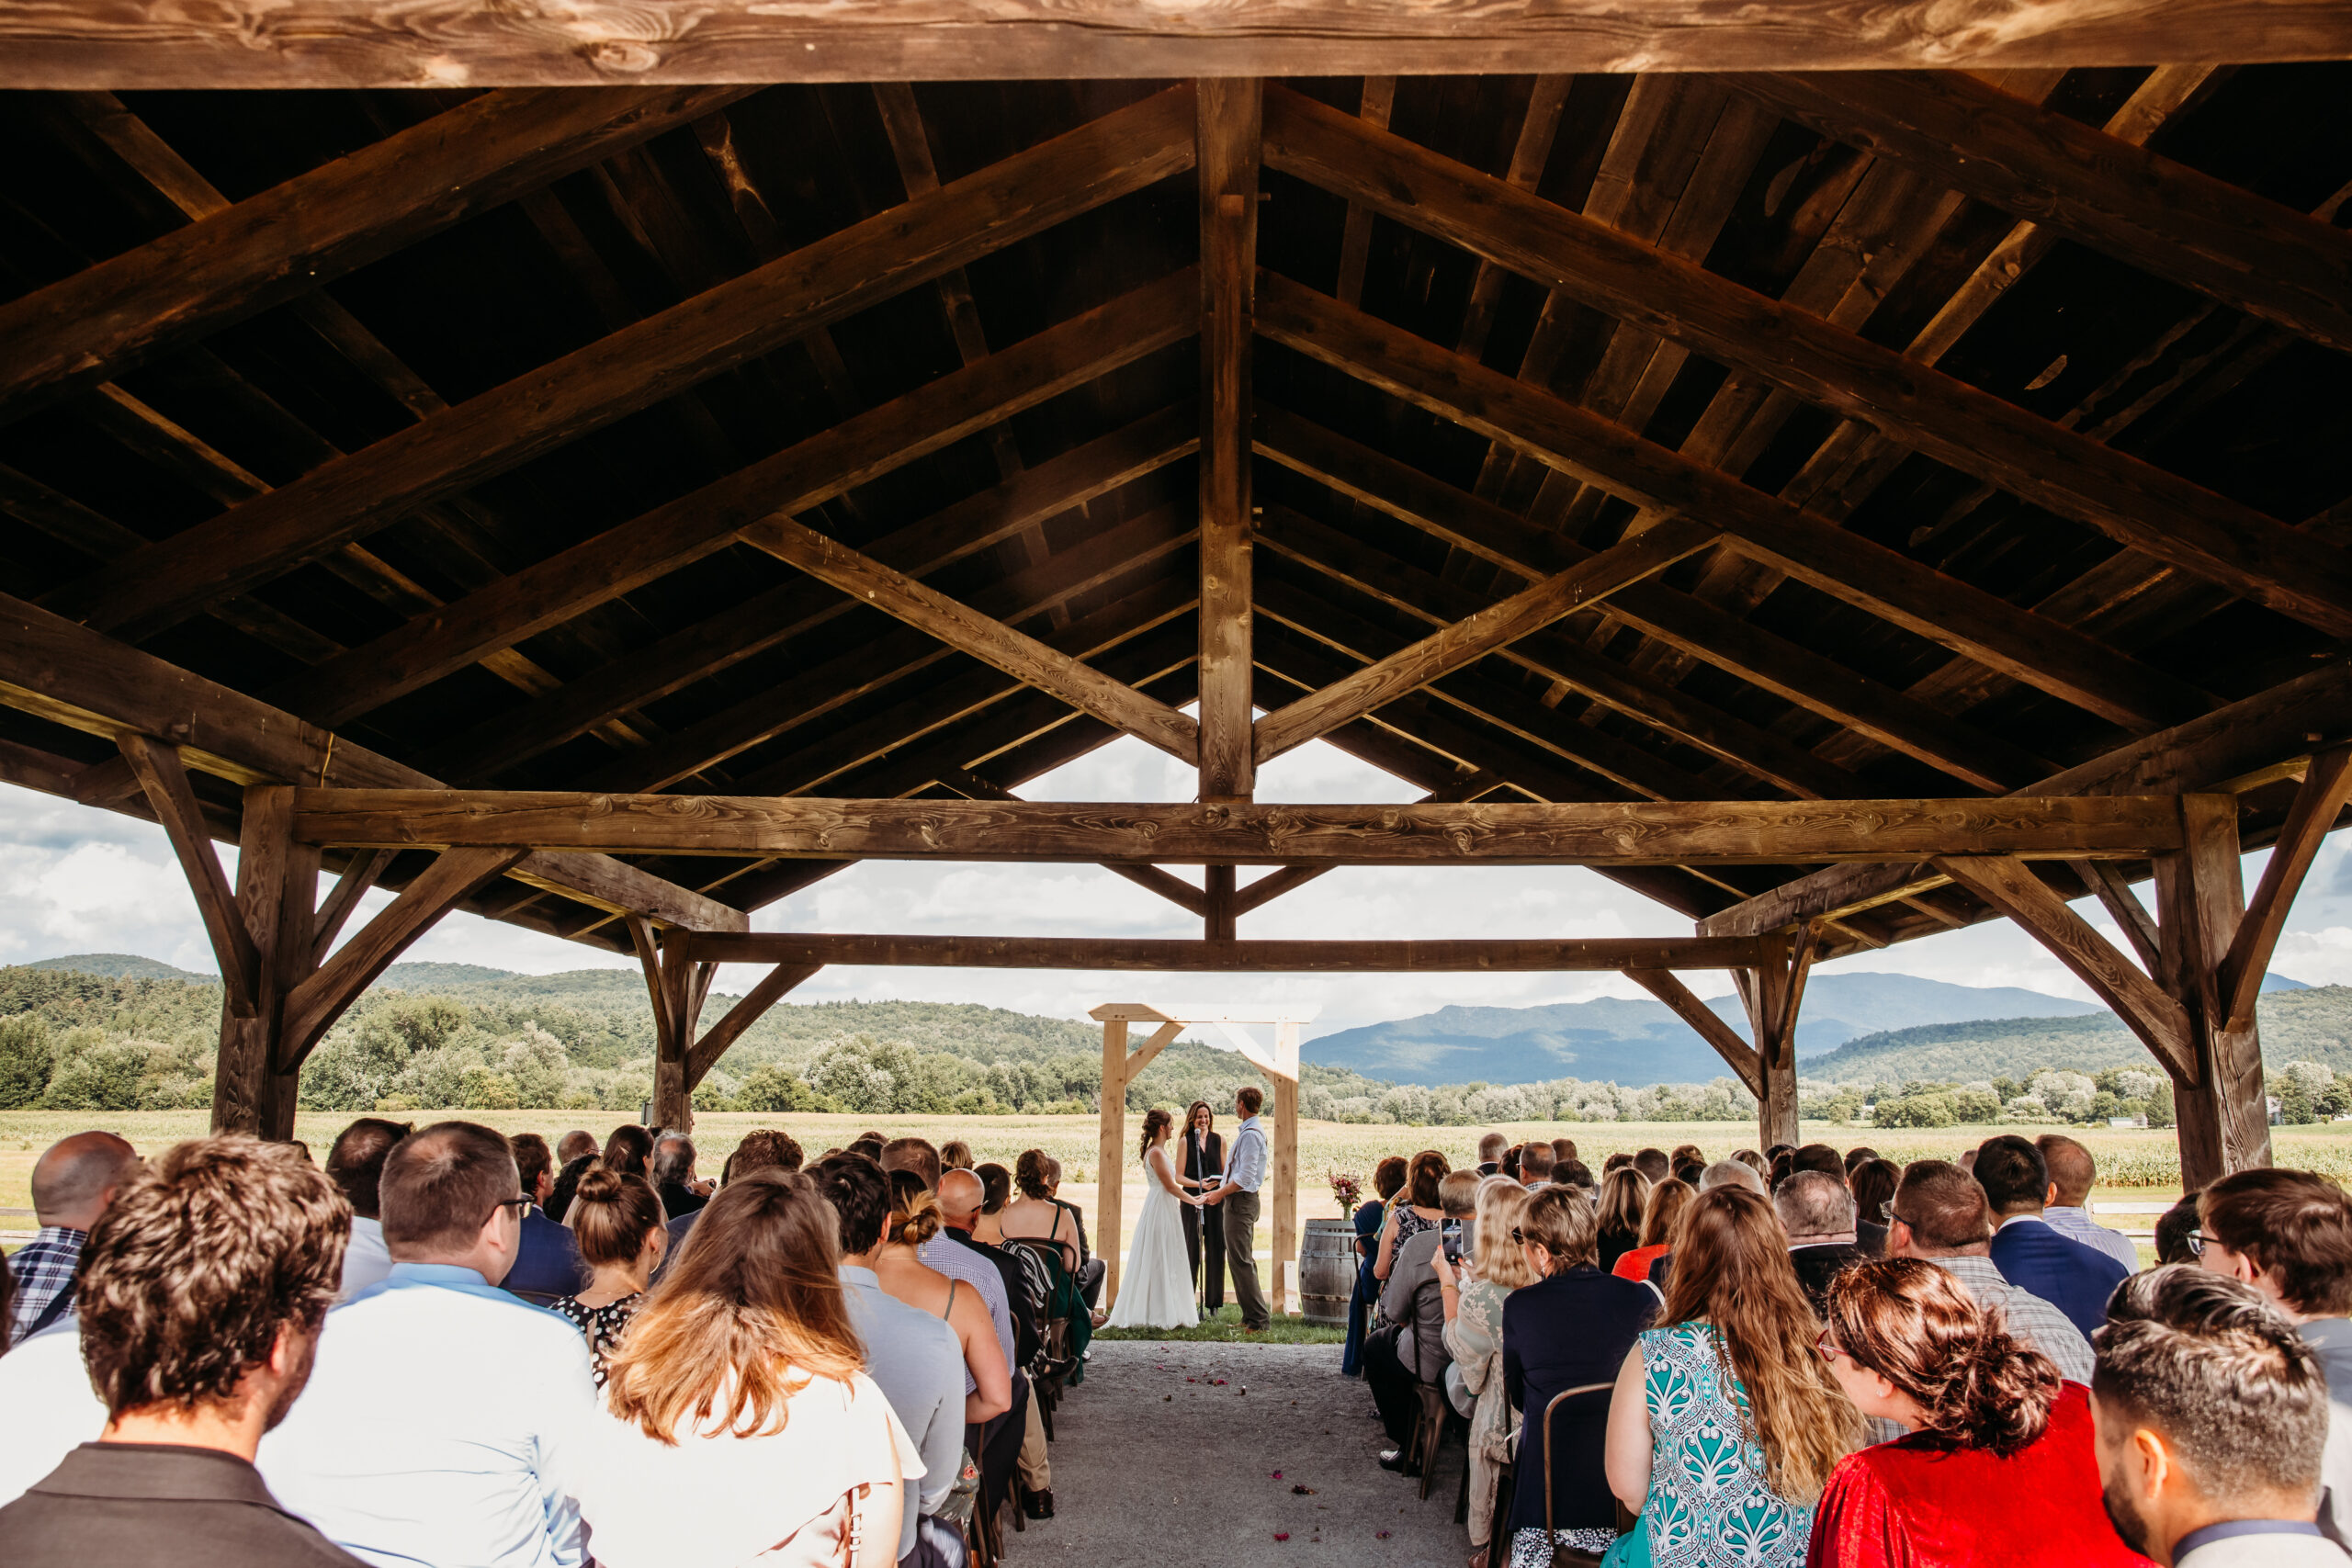 Jess and Greg standing together in front of their handmade wedding arbor at their farmers market themed wedding in Vermont